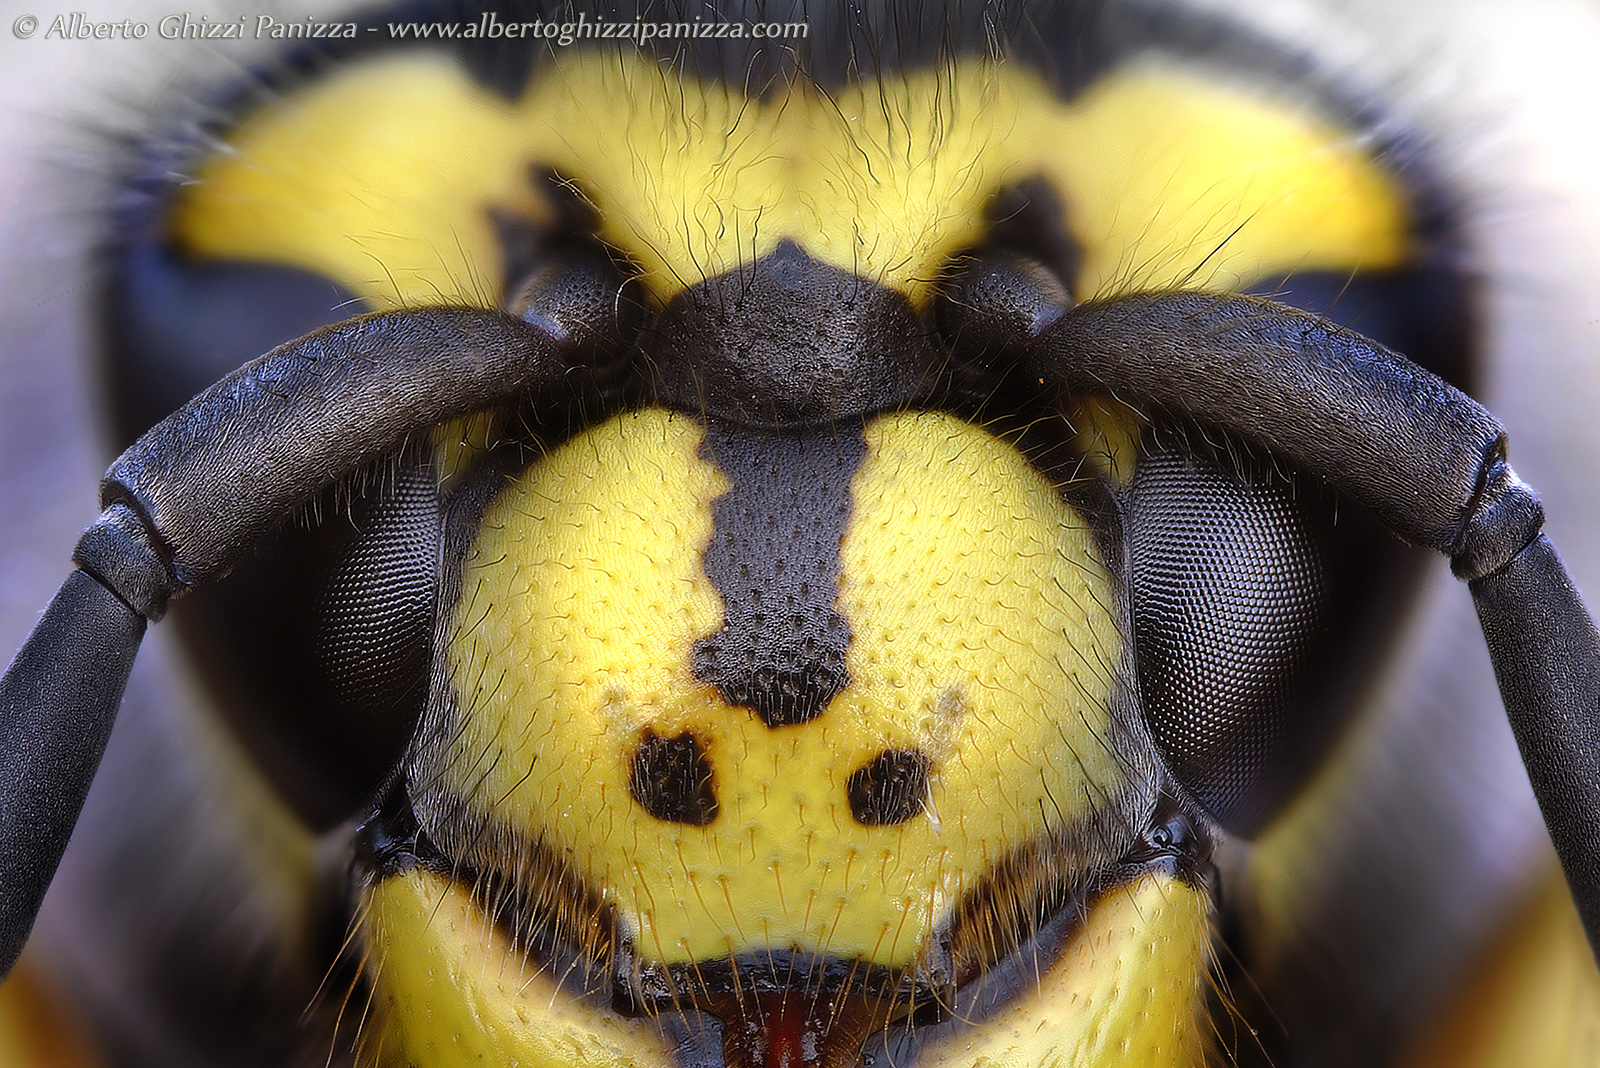 The eyes of the wasp...